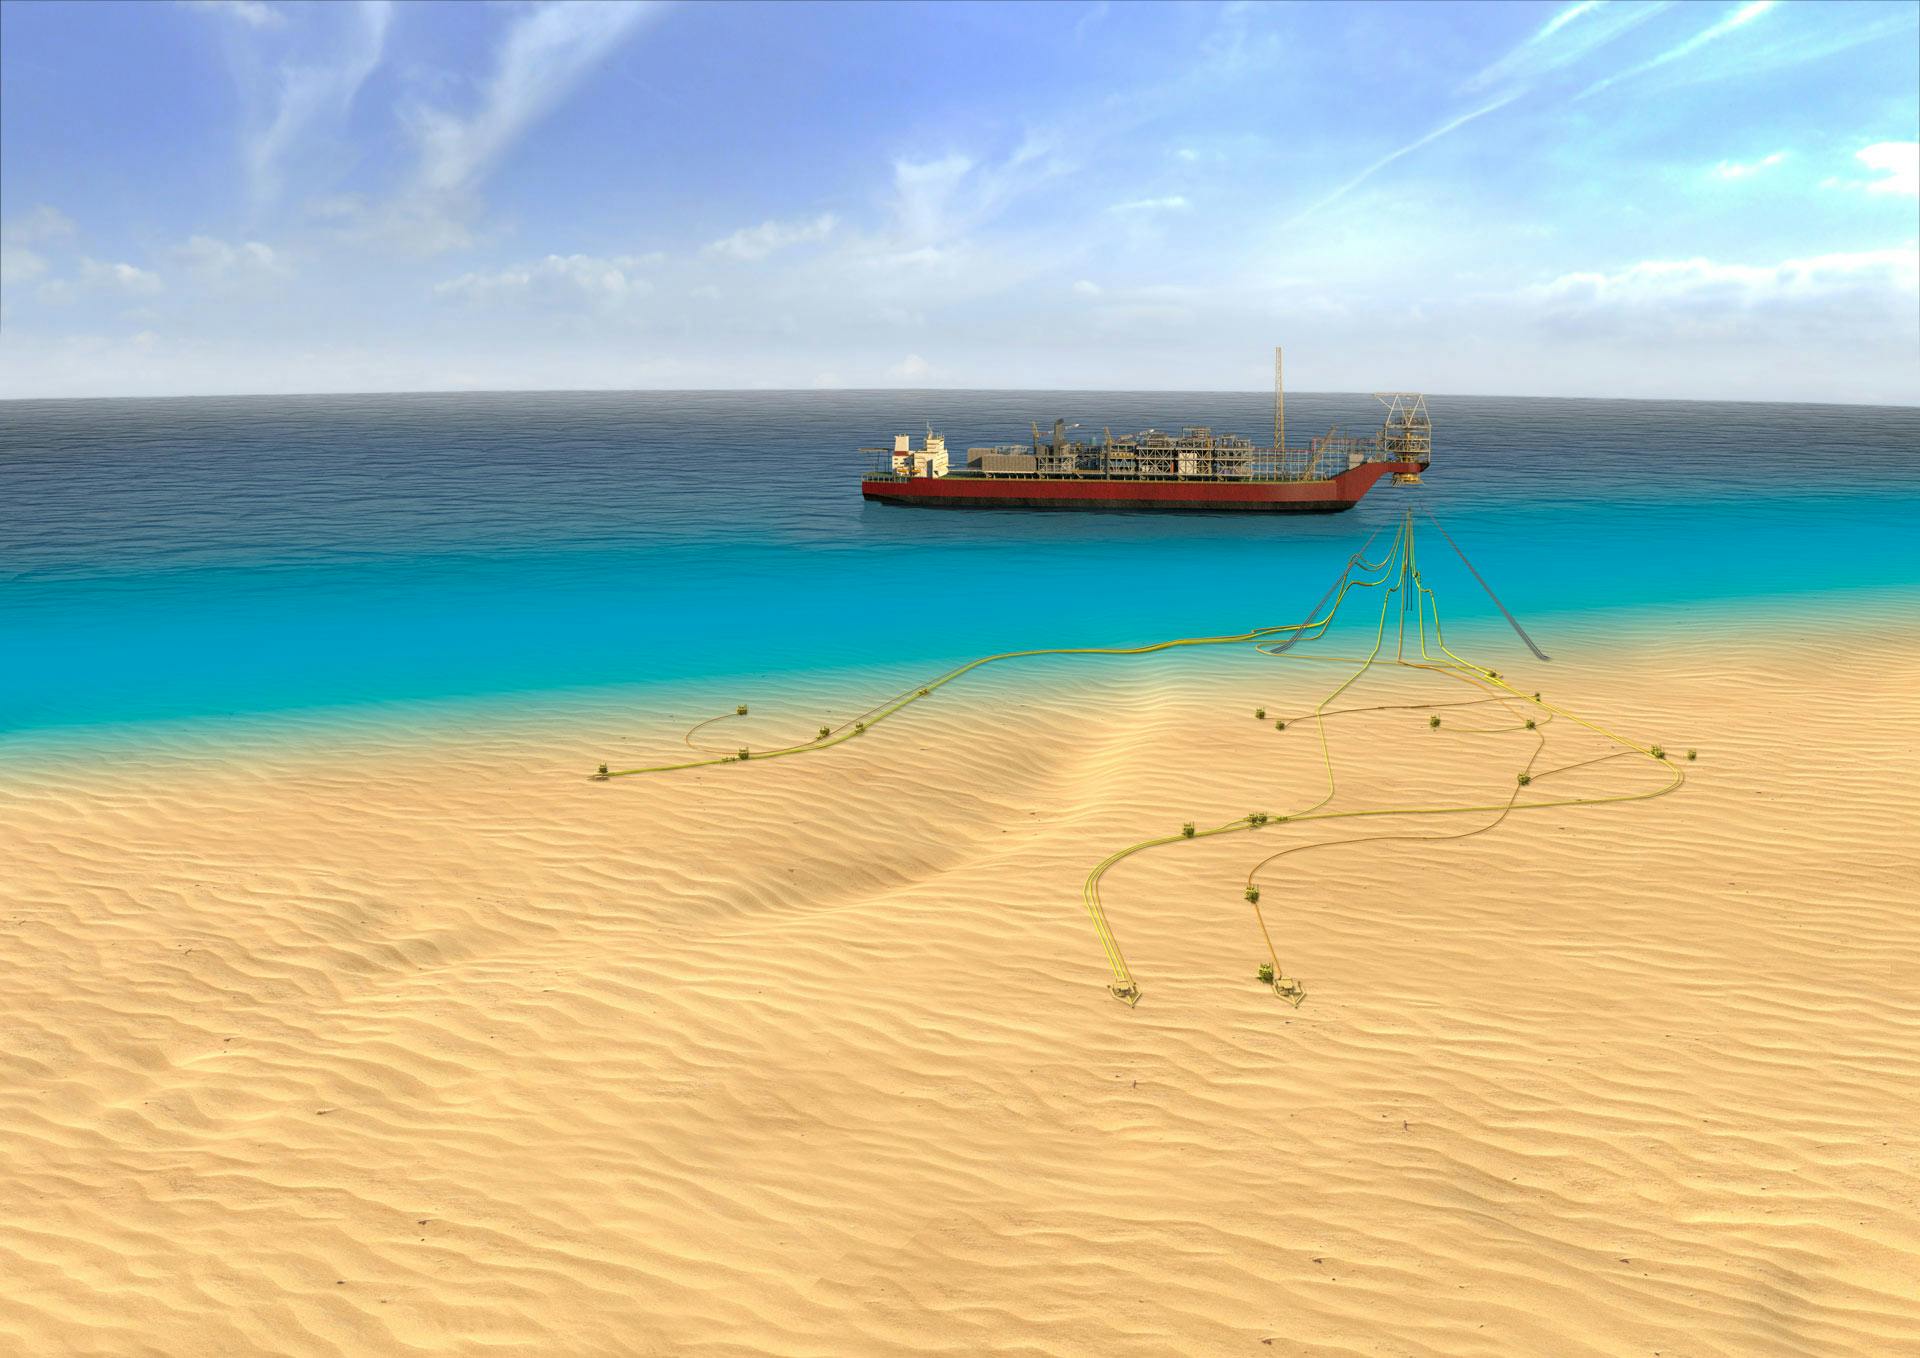 Subsea 7 flexible pipeline system for the Sangomar, phase 1 project offshore Senegal